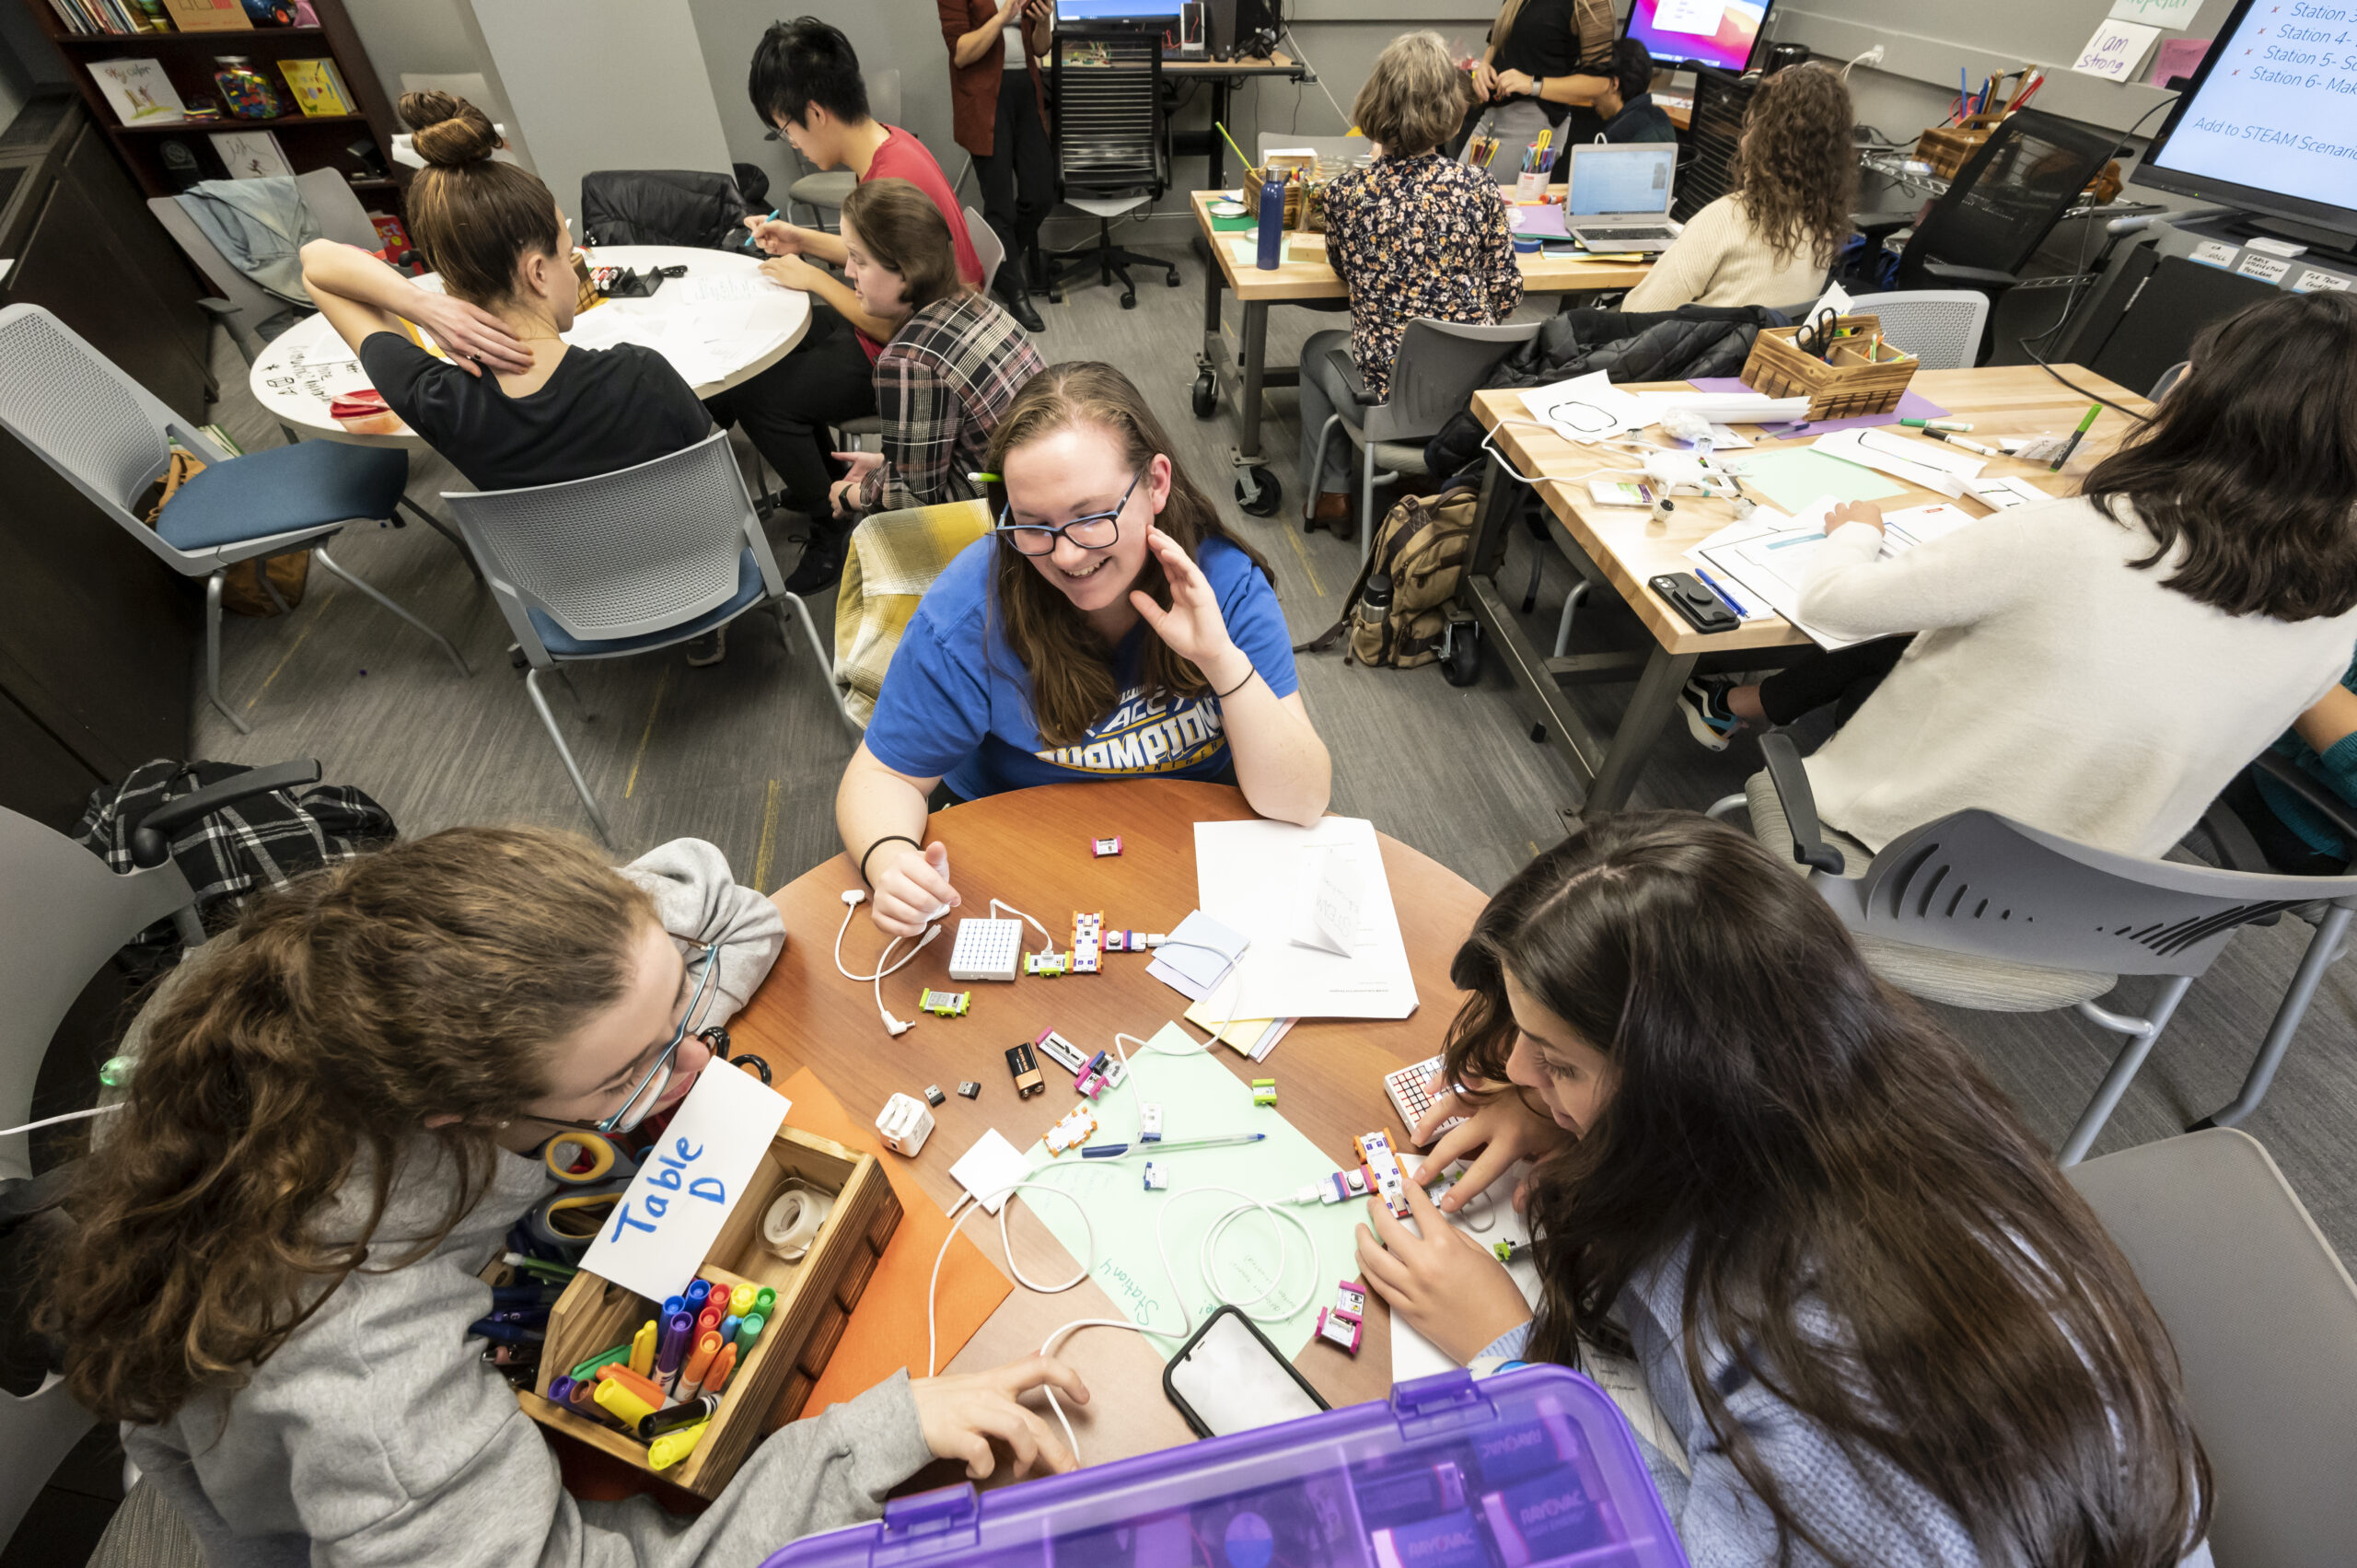 Three students work on a circuitry project in a makerspace classroom